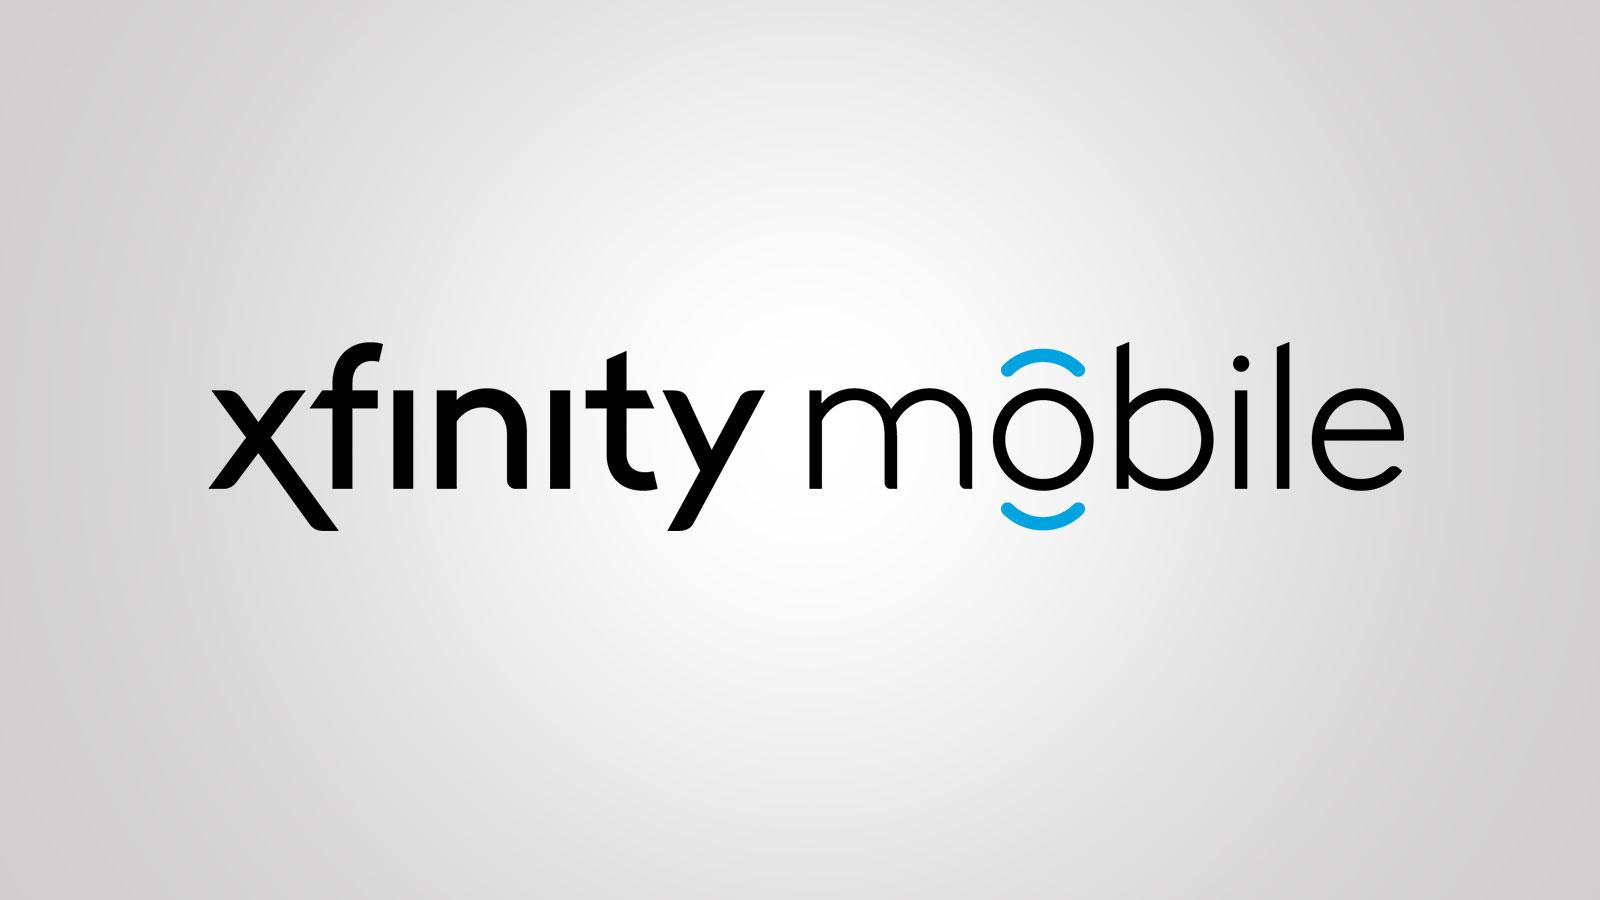 Free $200 Prepaid Gift Card for Switching to Xfinity Mobile